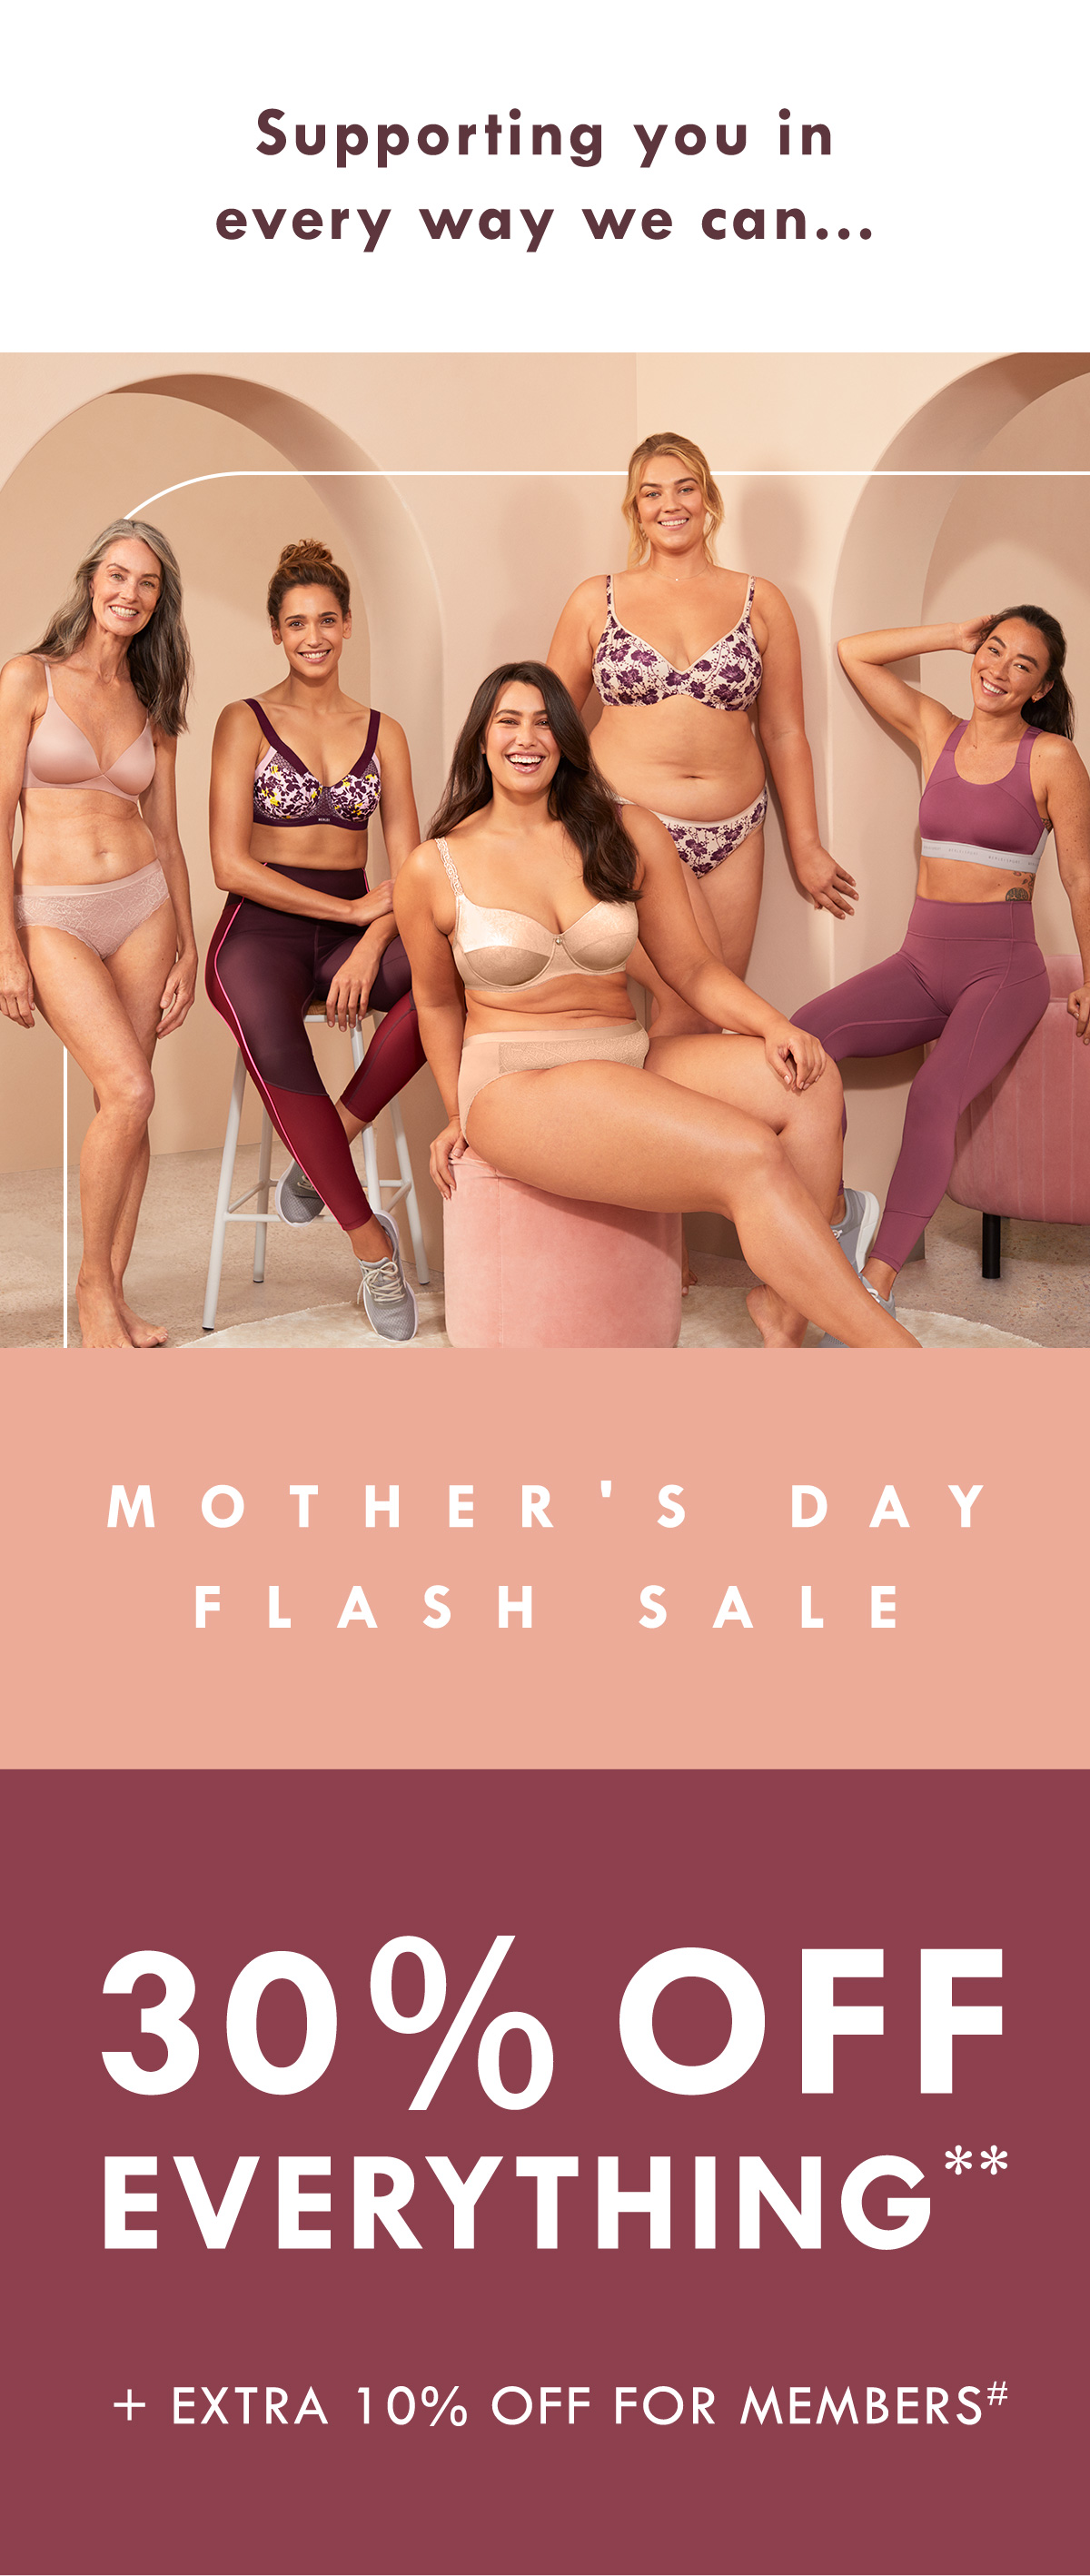 Mother''s Day Flash S a l e. 30% off everything + extra 10% off for members.